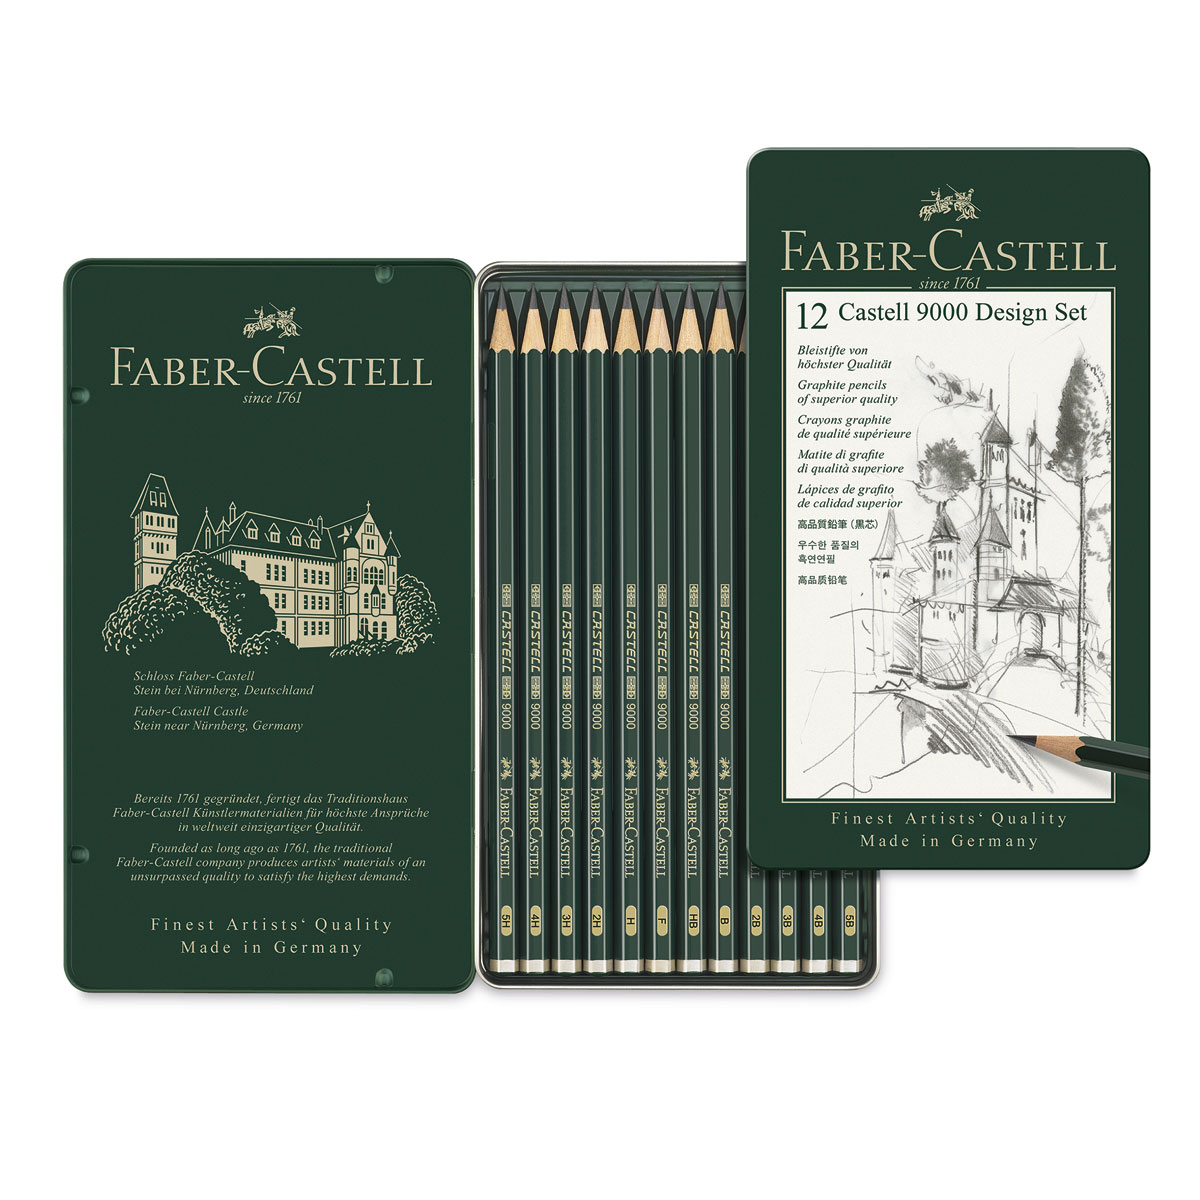 Faber-Castell Castell 9000 Series Graphite Pencil Jumbo Set of 5